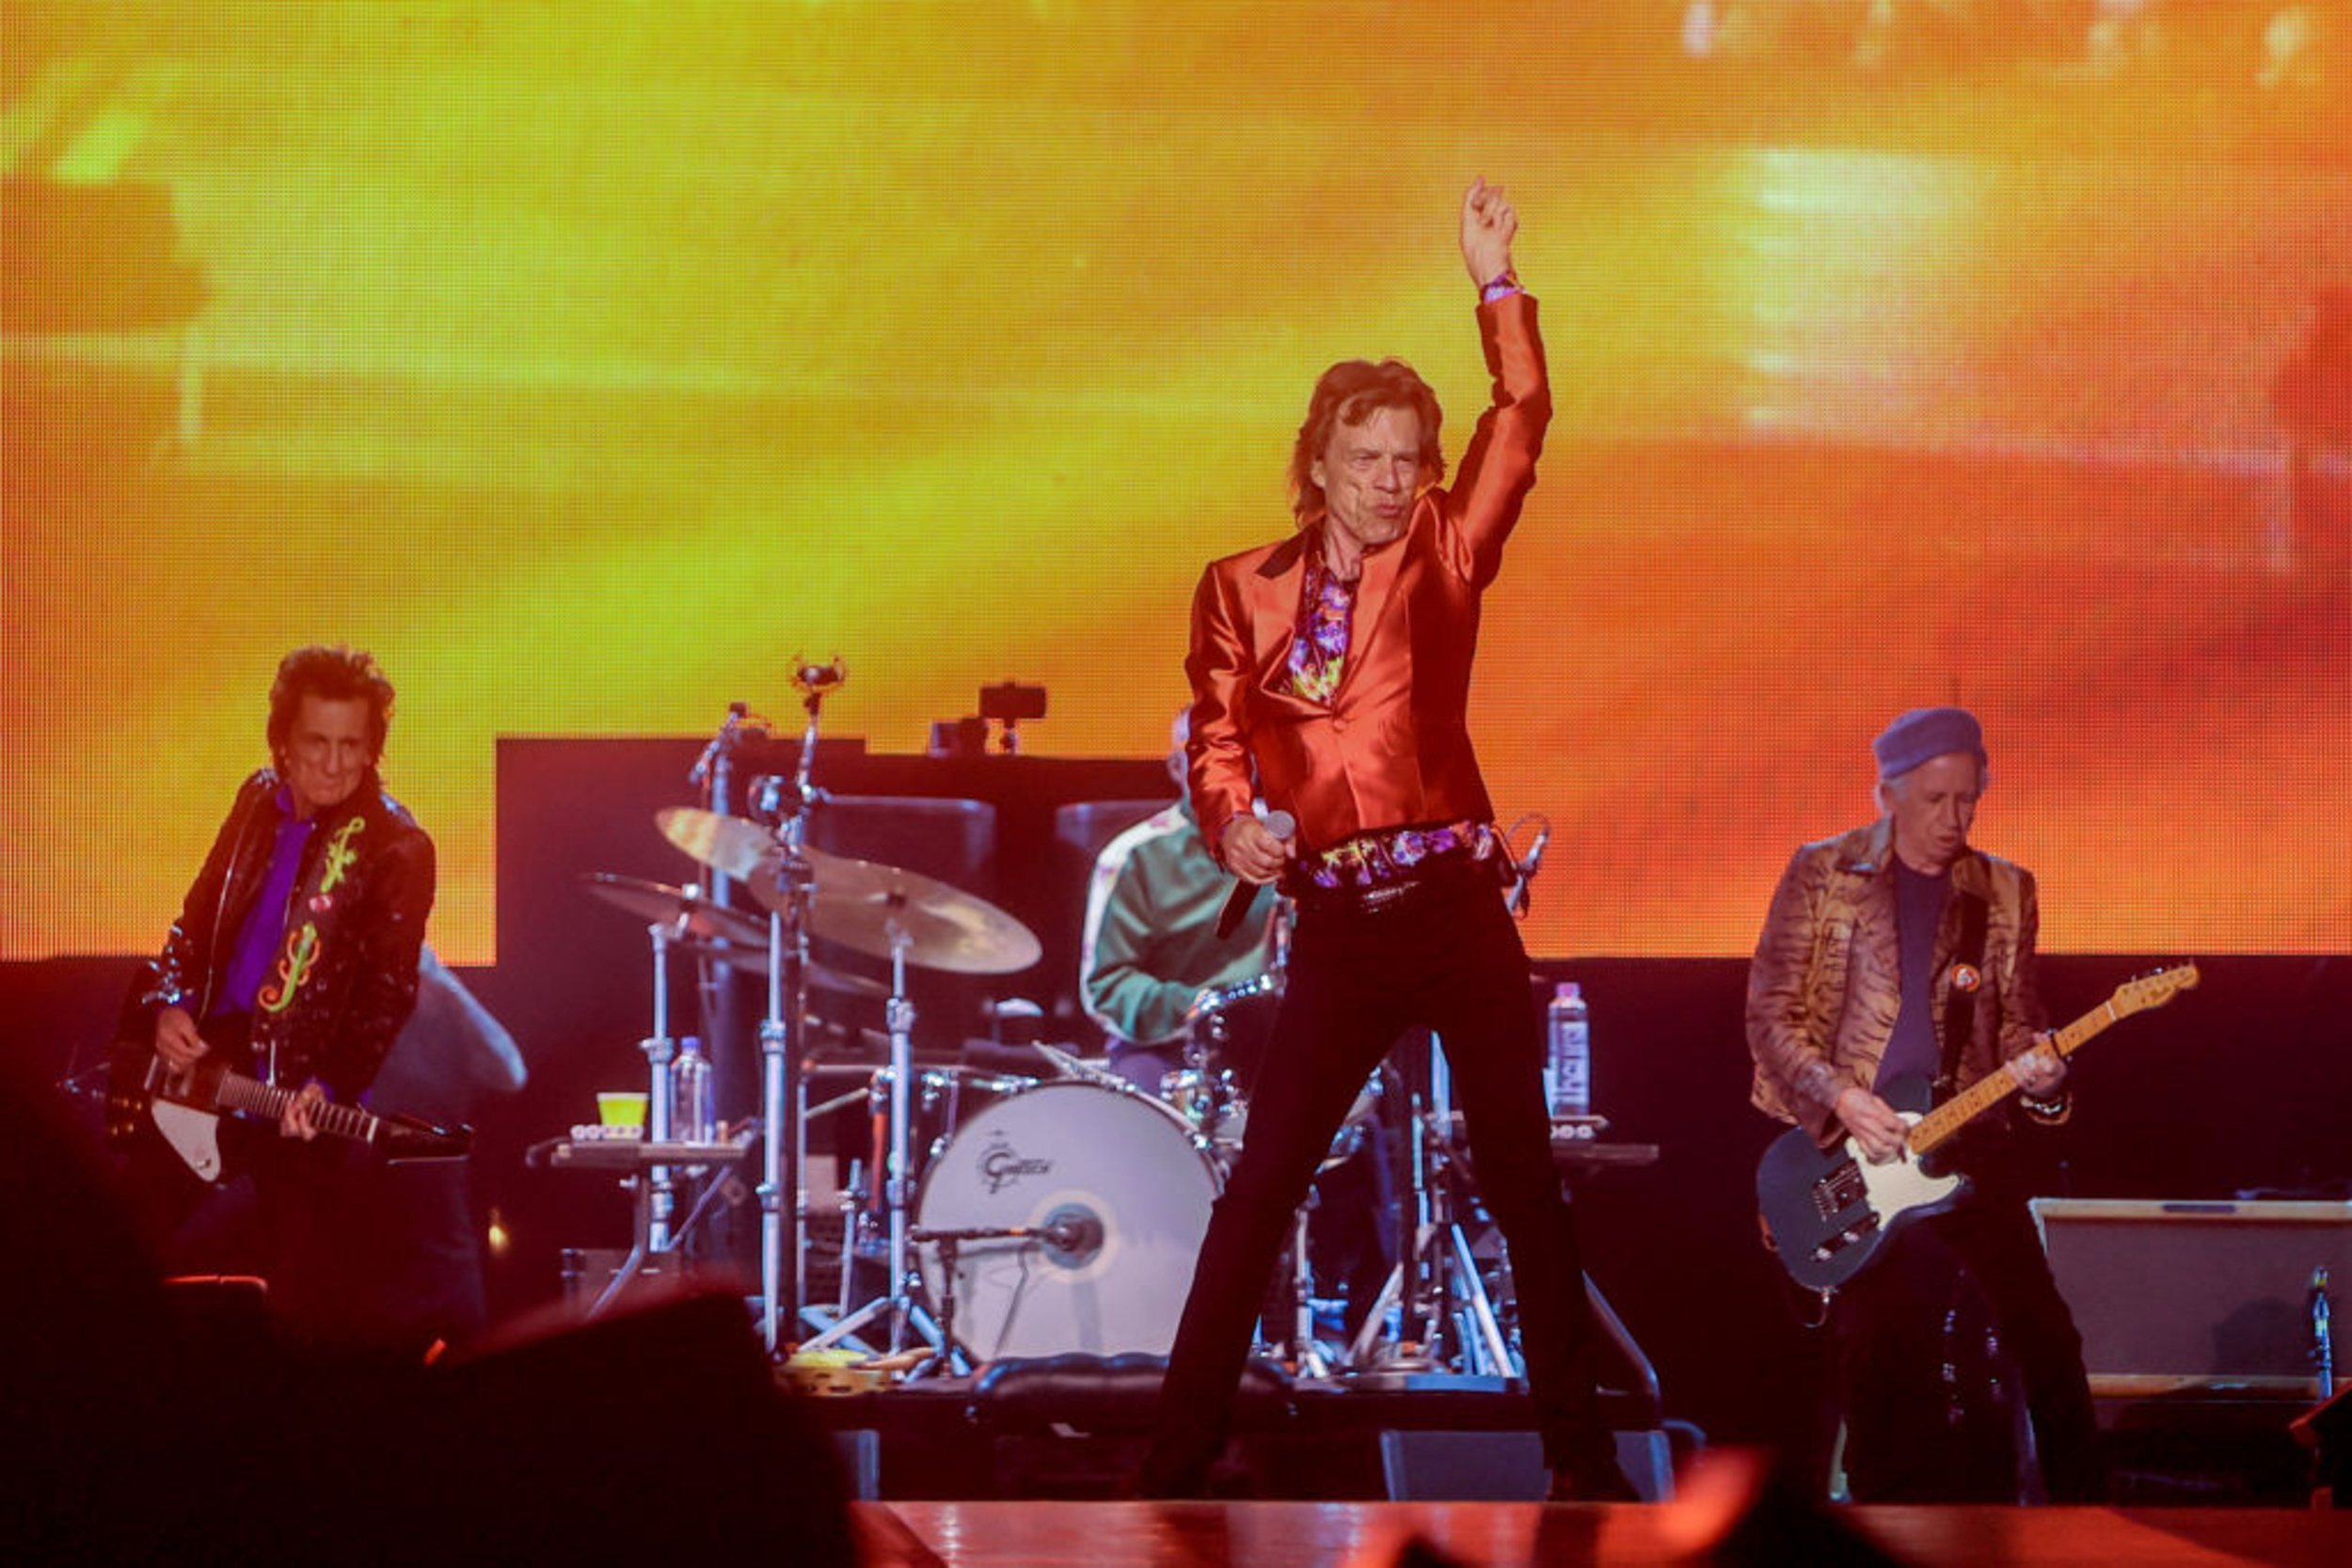 <p>Even after six decades since their first U.S. tour, The Rolling Stones are still in high demand for live shows. The rock band is set to hit the road on a 16-city tour to support their latest album <em>Hackney Diamonds.</em> The tour will run from April 28th through July 17th. </p><p>You may also like: <a href='https://www.yardbarker.com/entertainment/articles/bands_of_brothers_sibling_sonics_through_the_years_032524/s1__26368838'>Bands of brothers: Sibling sonics through the years</a></p>